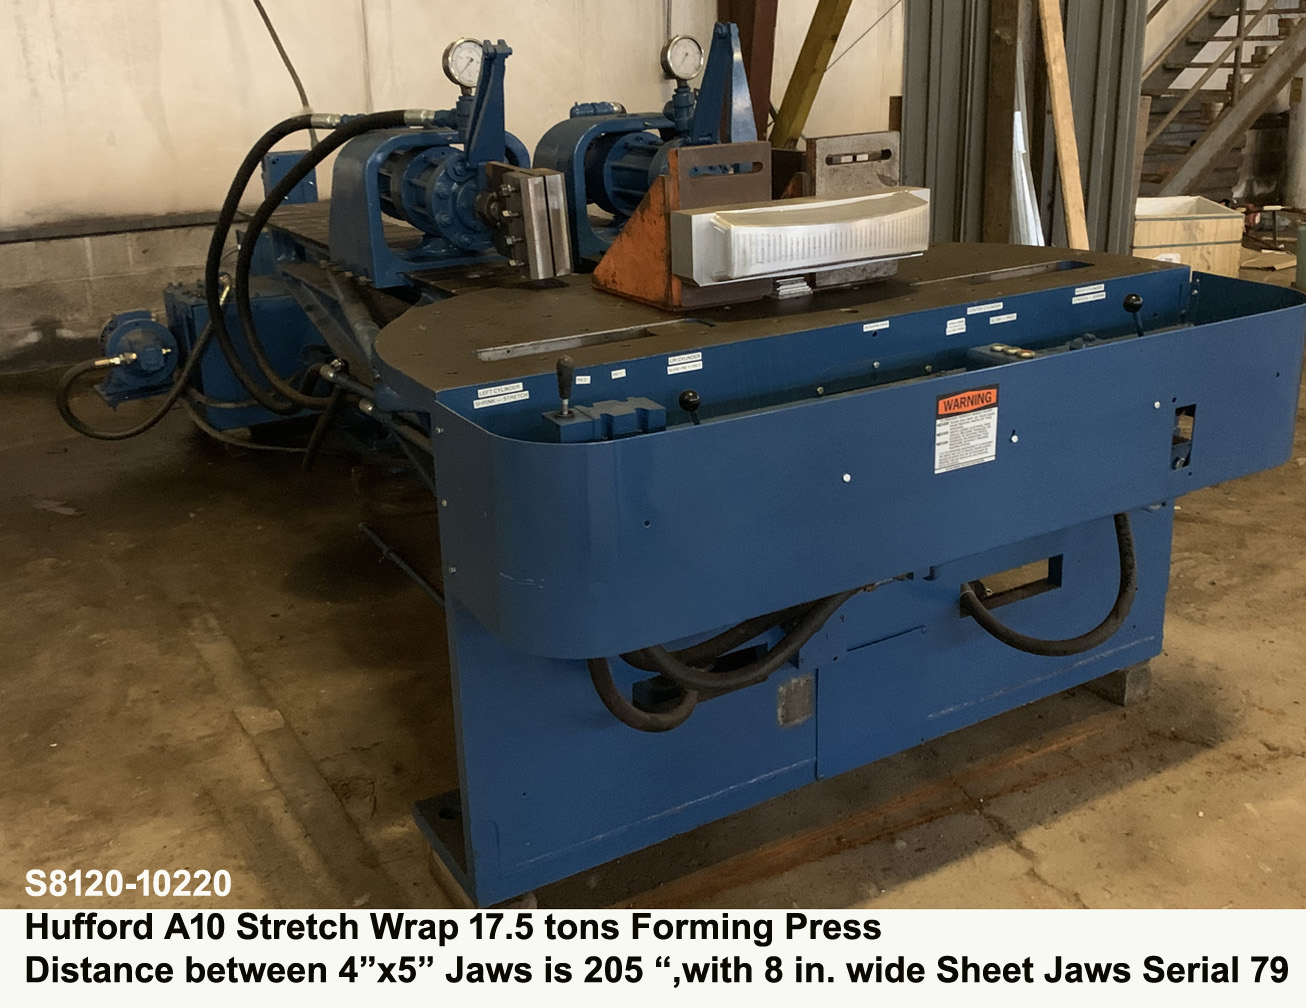 Hufford A-10 Stretch Wrap Forming Press Distance between 4" x 5" jaws 205" - 17.5 tons - Tension Cylinder Stroke18½", Simultaneous Arms Movement, Serial Number 79, Inventory reference S8120-10220-1 Front view